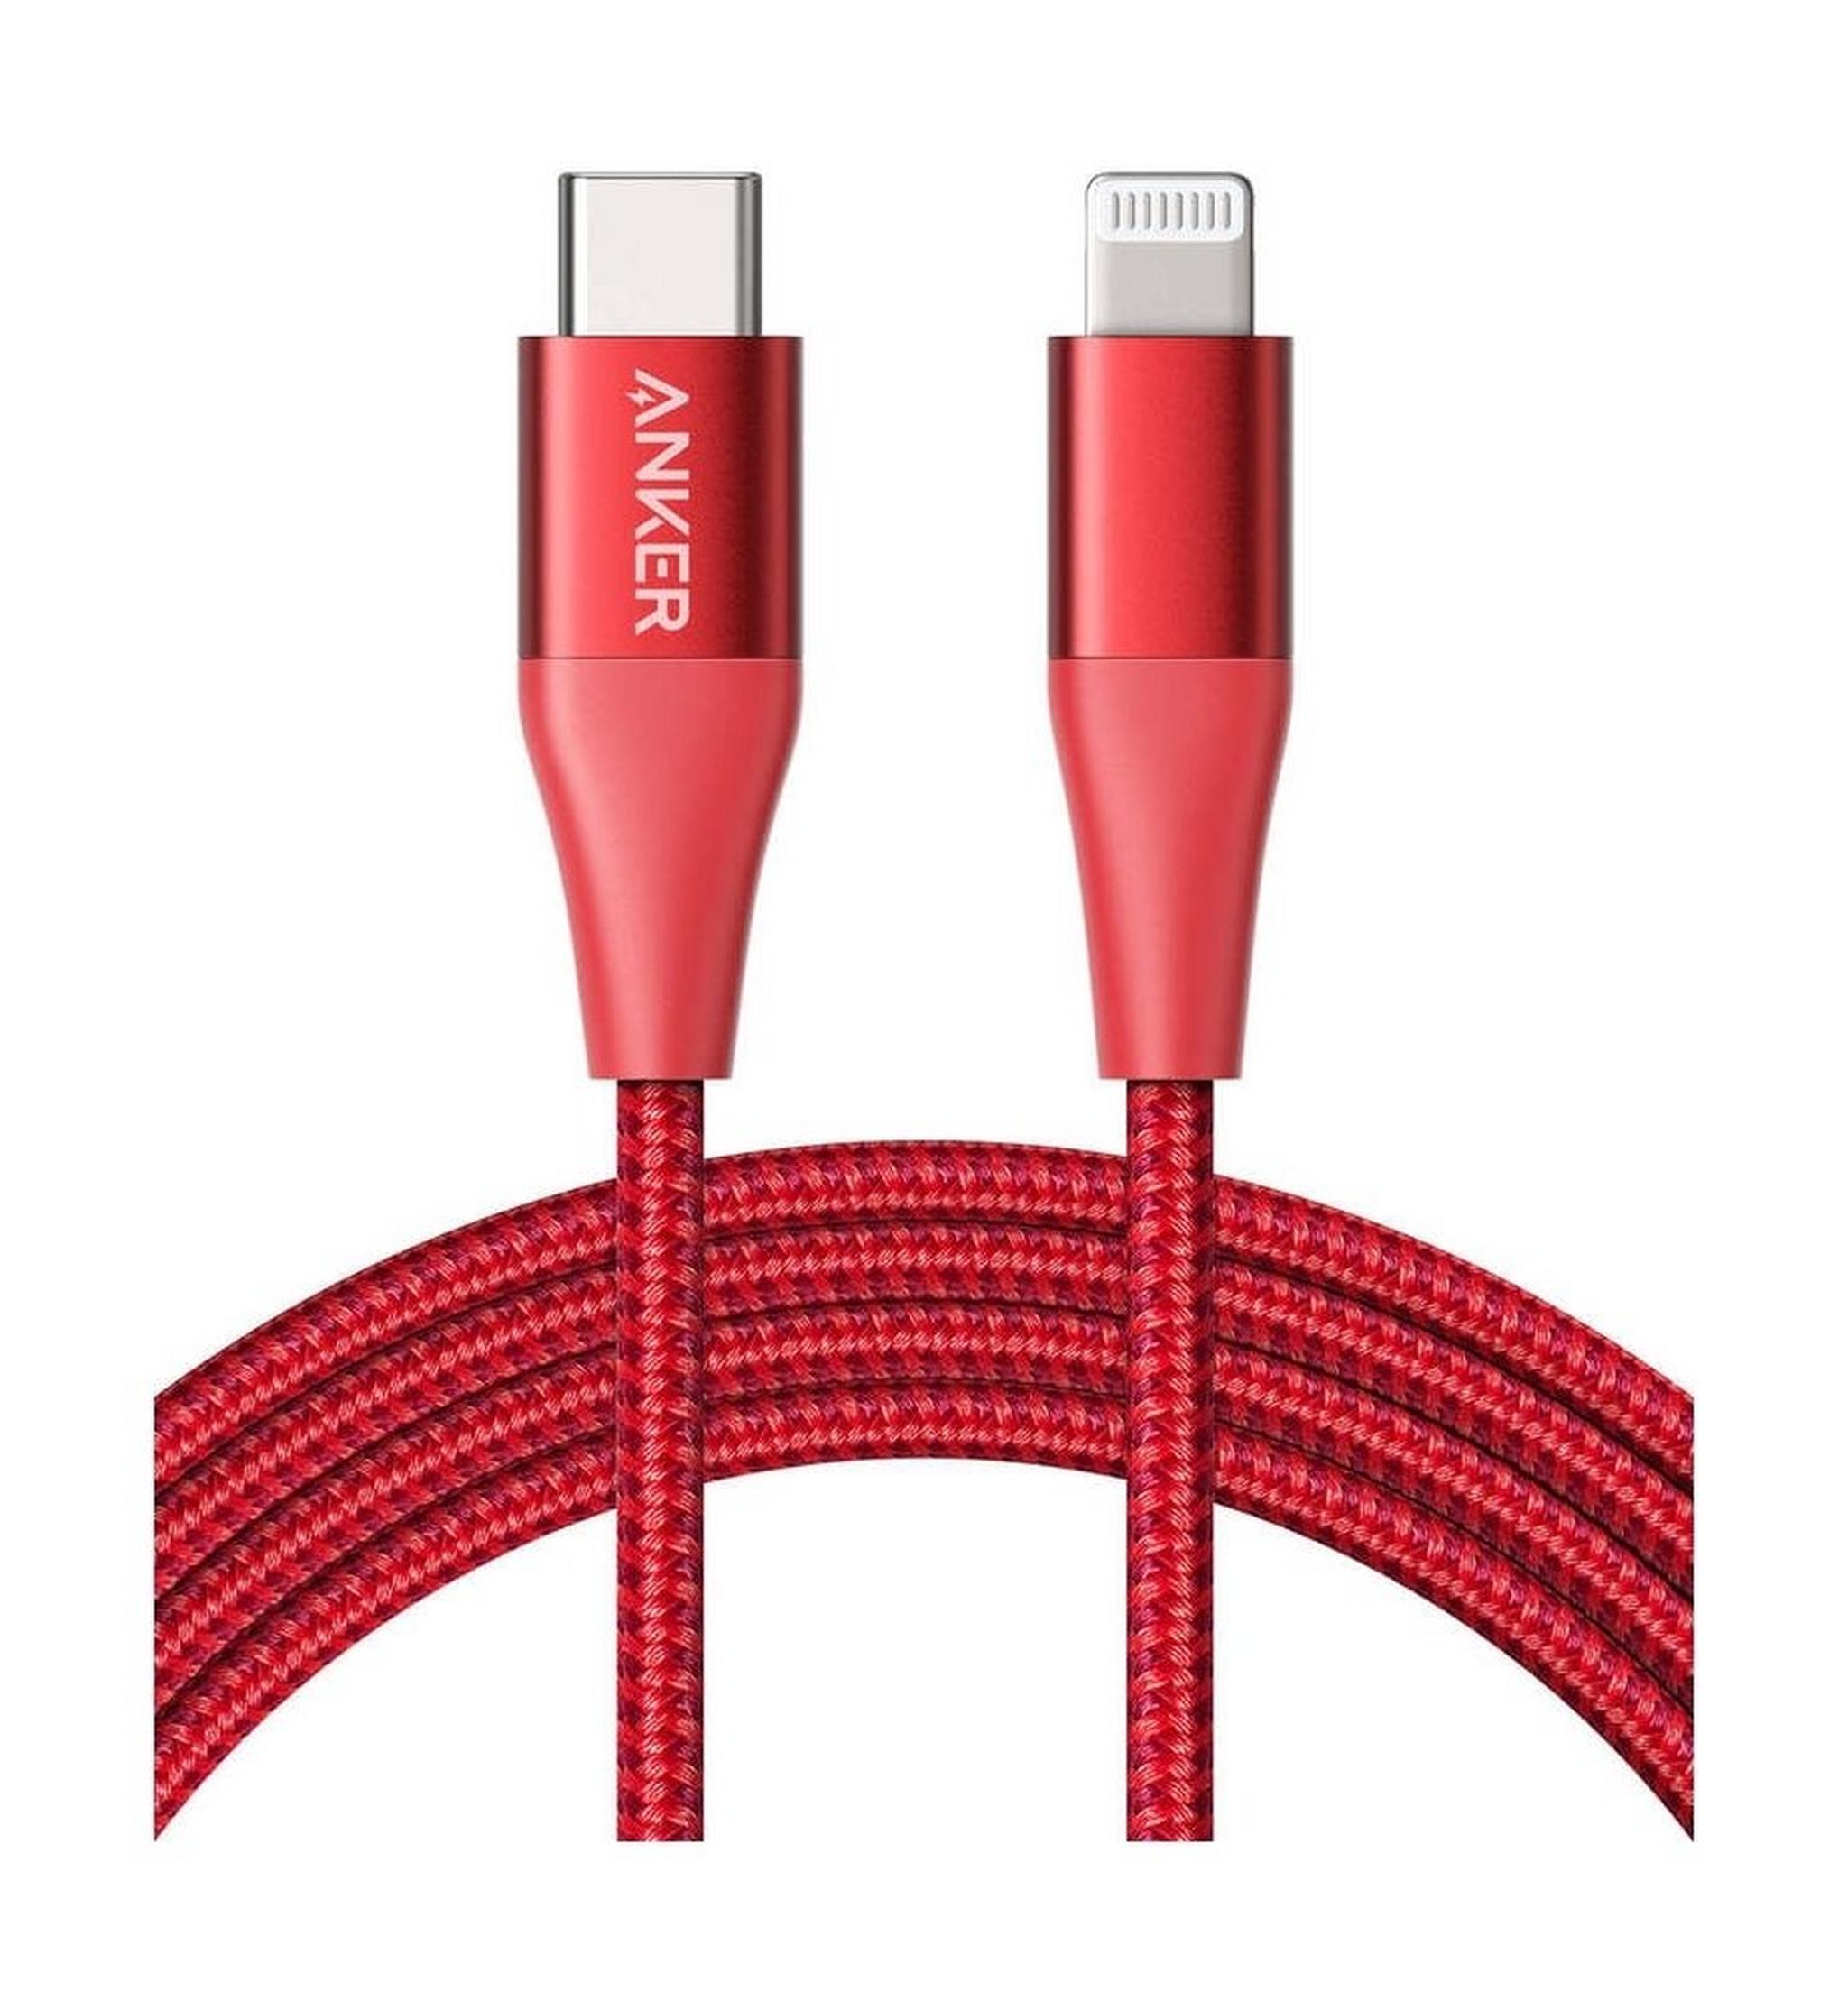 Anker PowerLine+ II 1.8m USB-C to Lightning Cable - Red